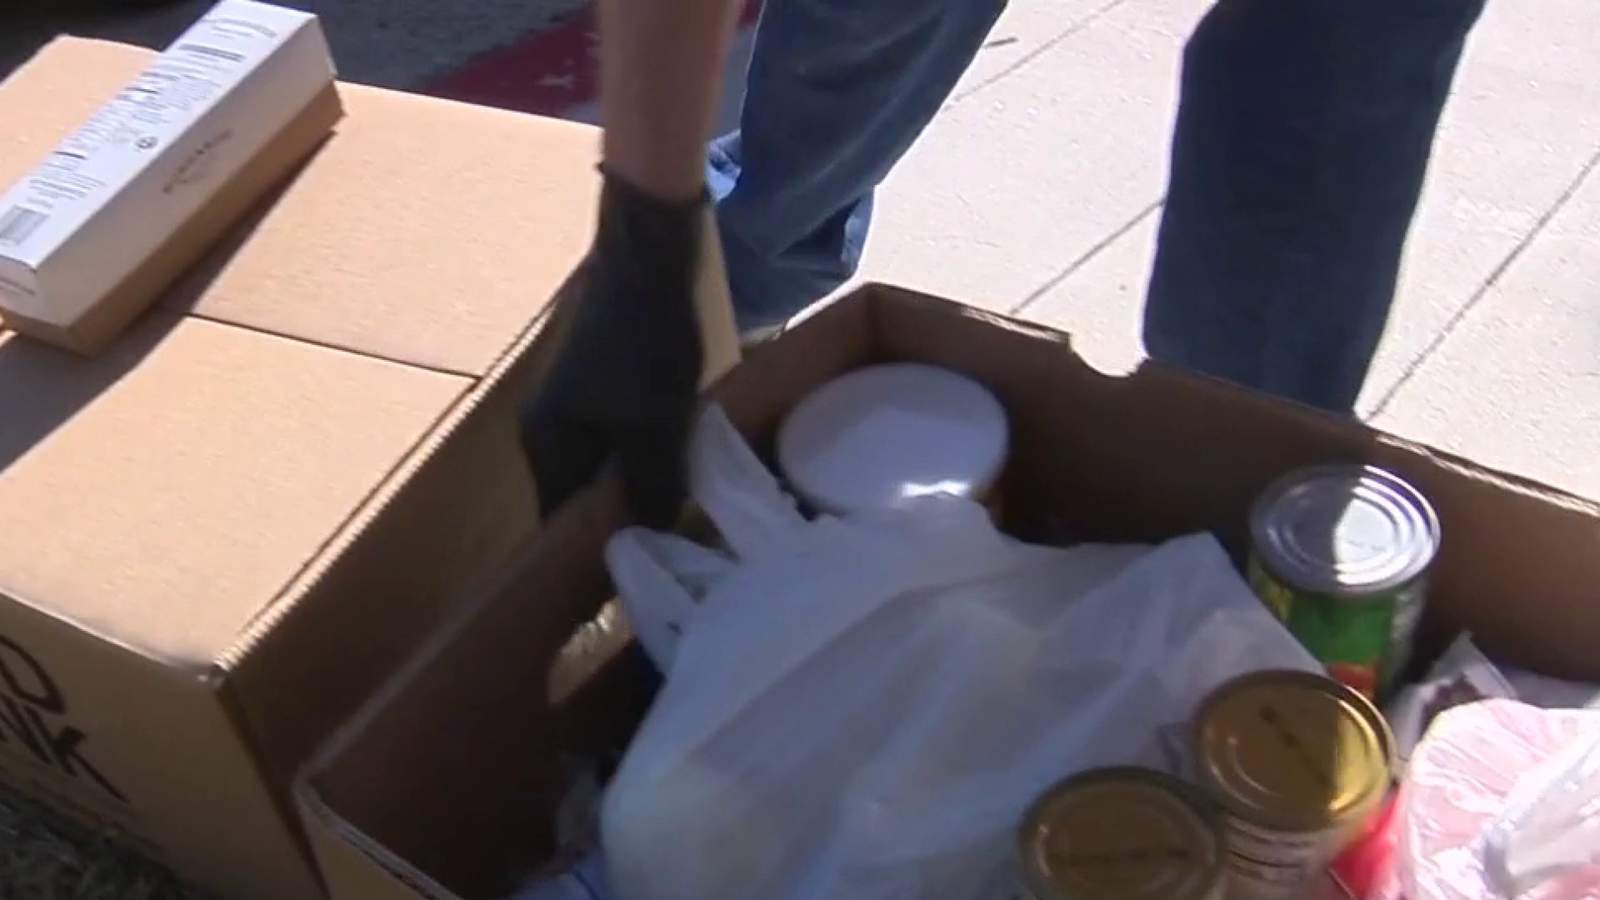 Volunteers for Project Hope distribute food at Episcopal Church of the Holy Spirit